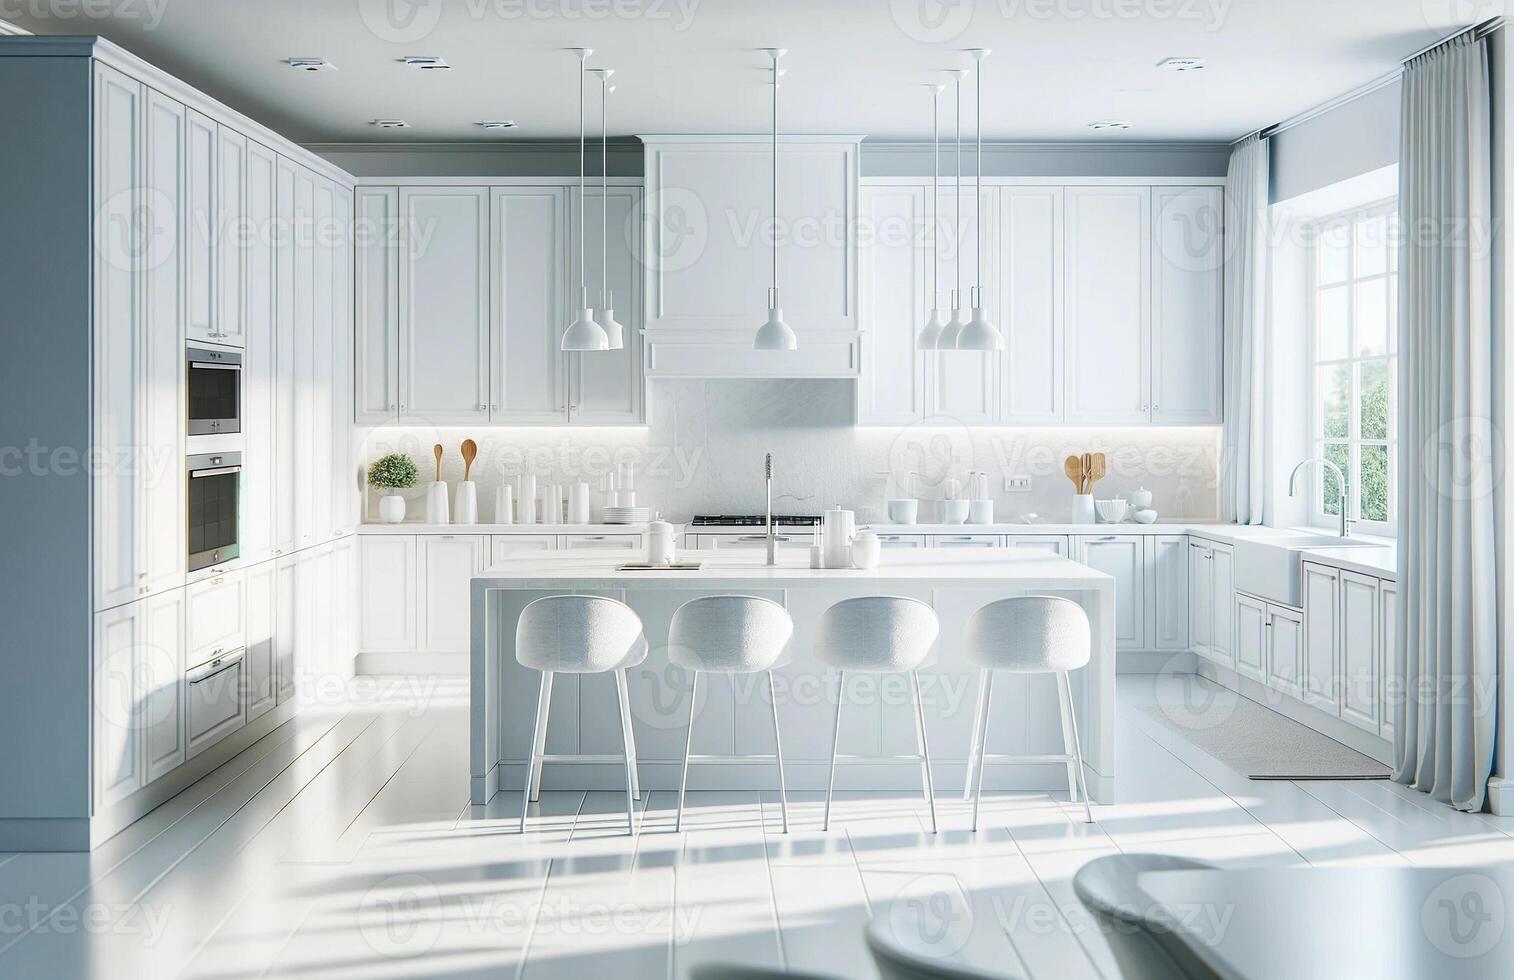 AI Generated A bright and white kitchen design in a modern home. The kitchen features white cabinetry with clean, sleek lines, creating a fresh and airy feel photo